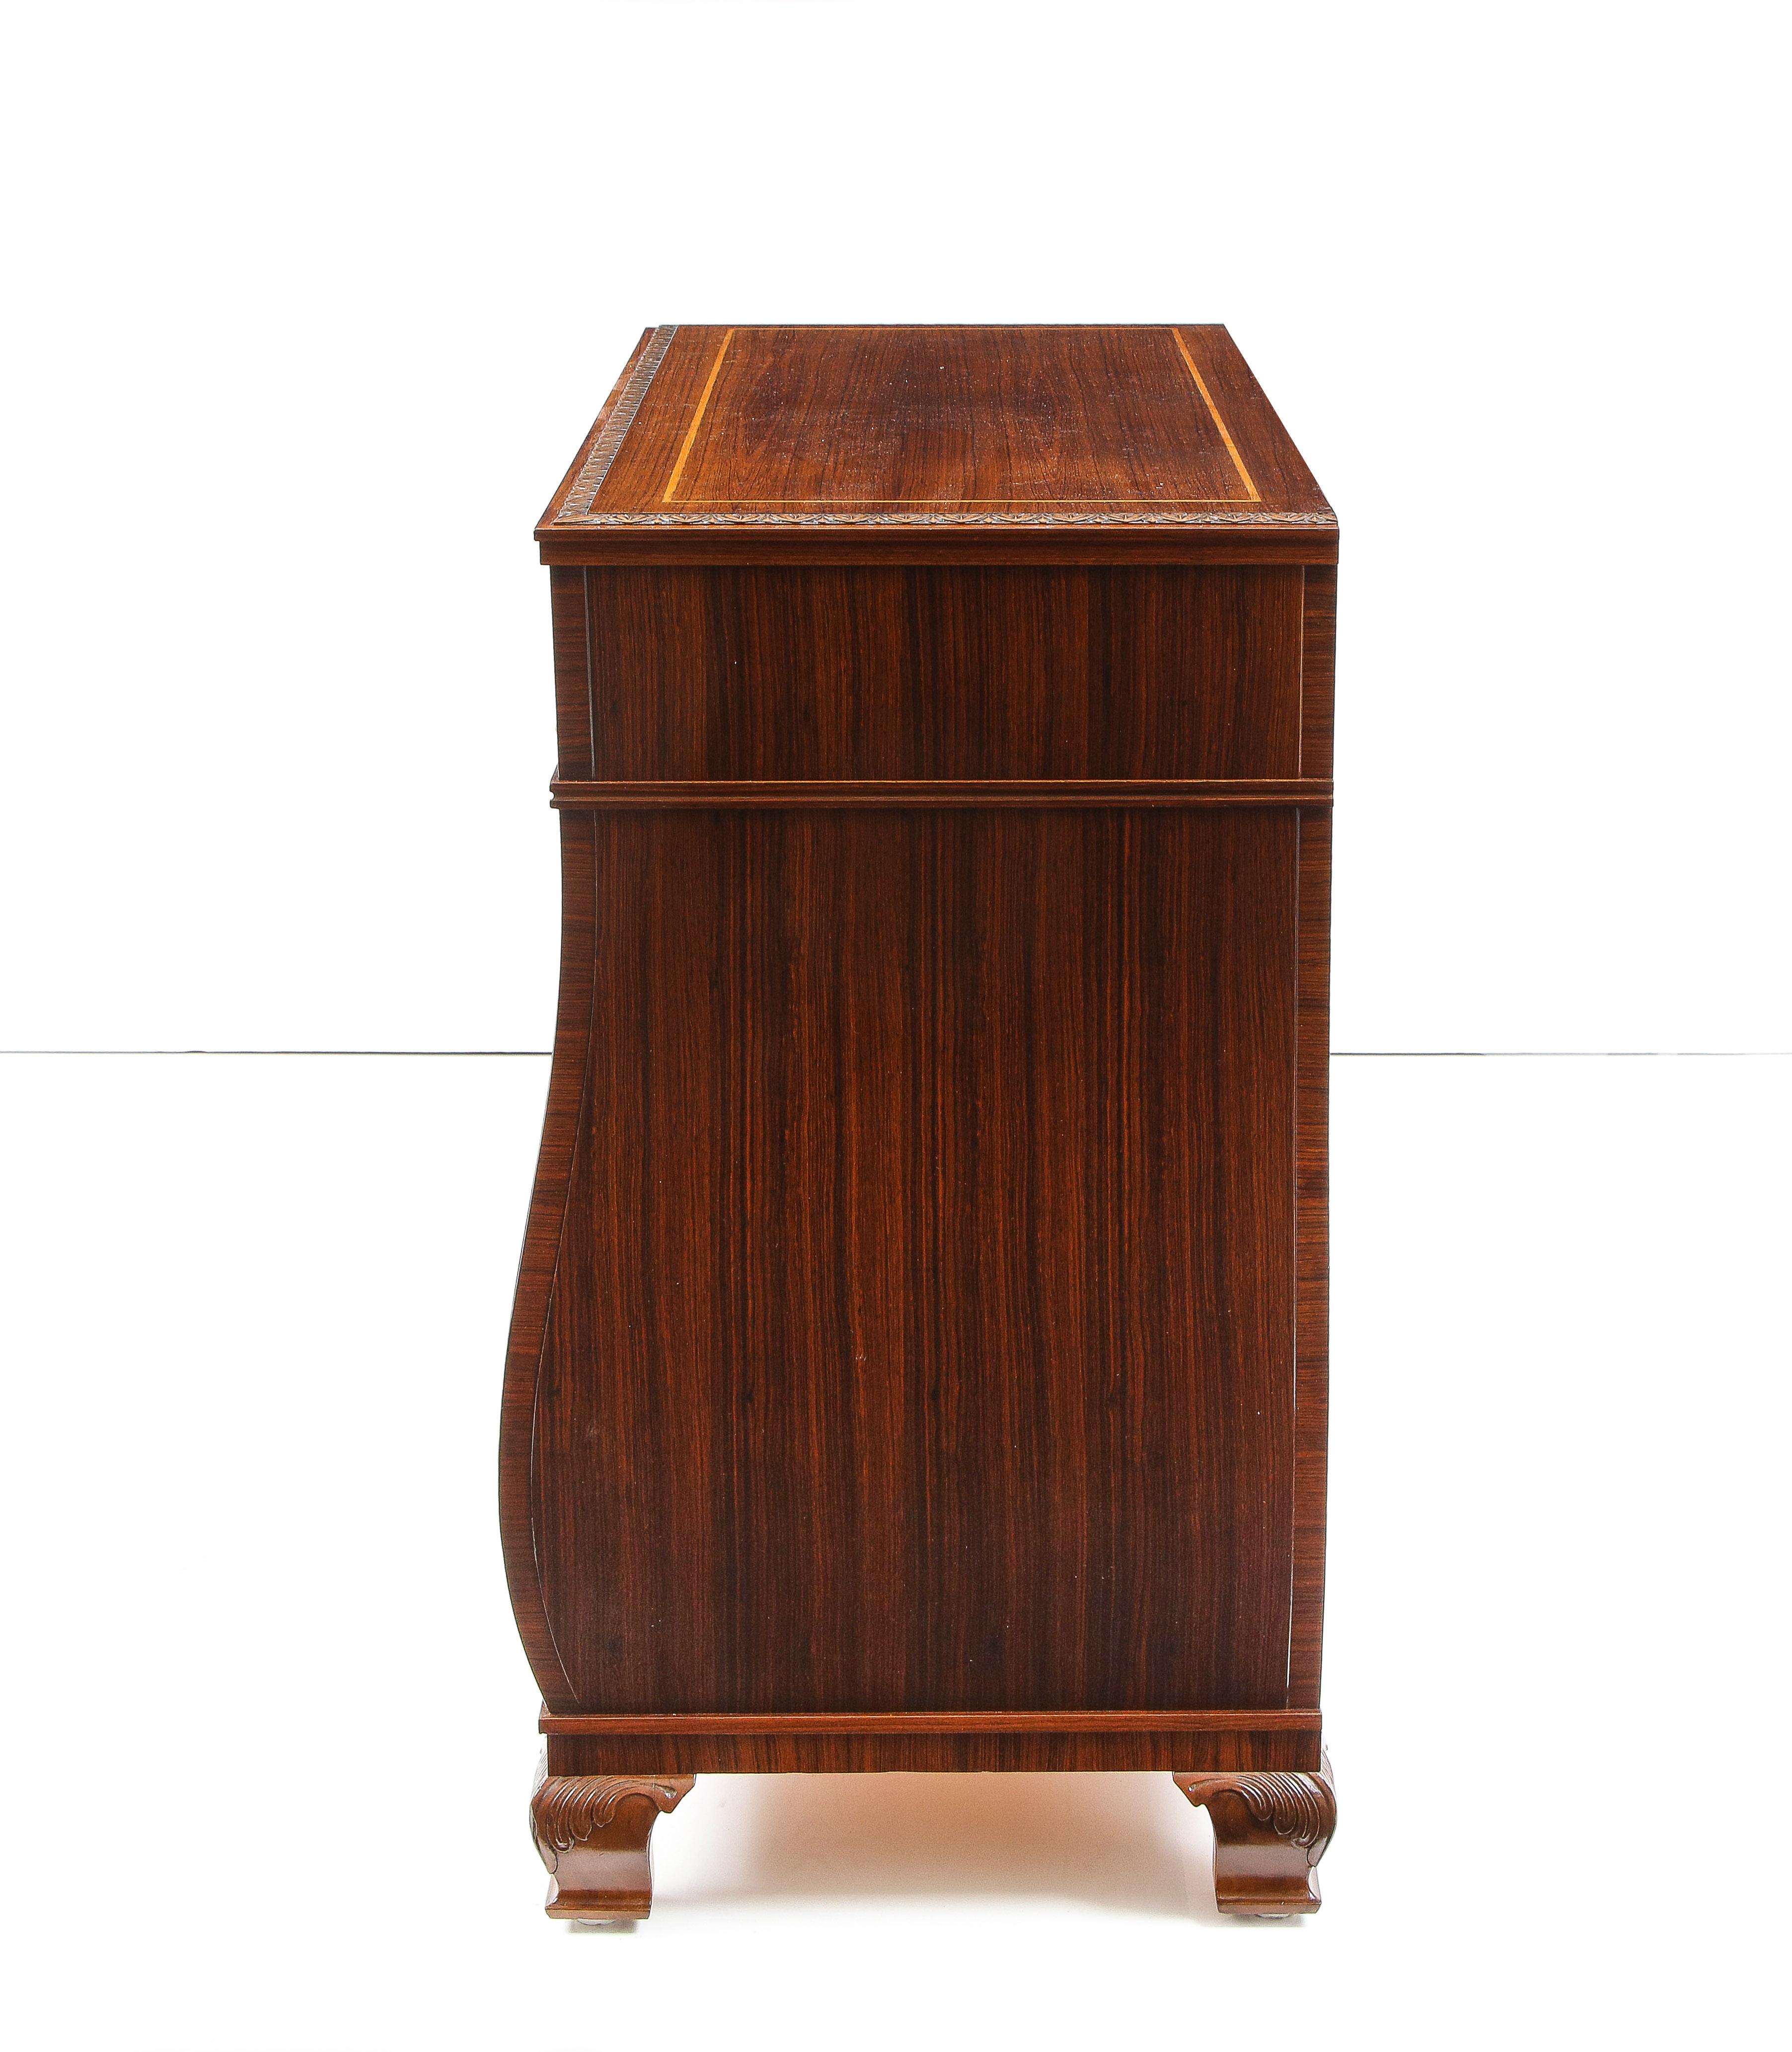 Swedish Grace Fruitwood Inlaid Rosewood Chest of Drawers, Circa 1930-40 4